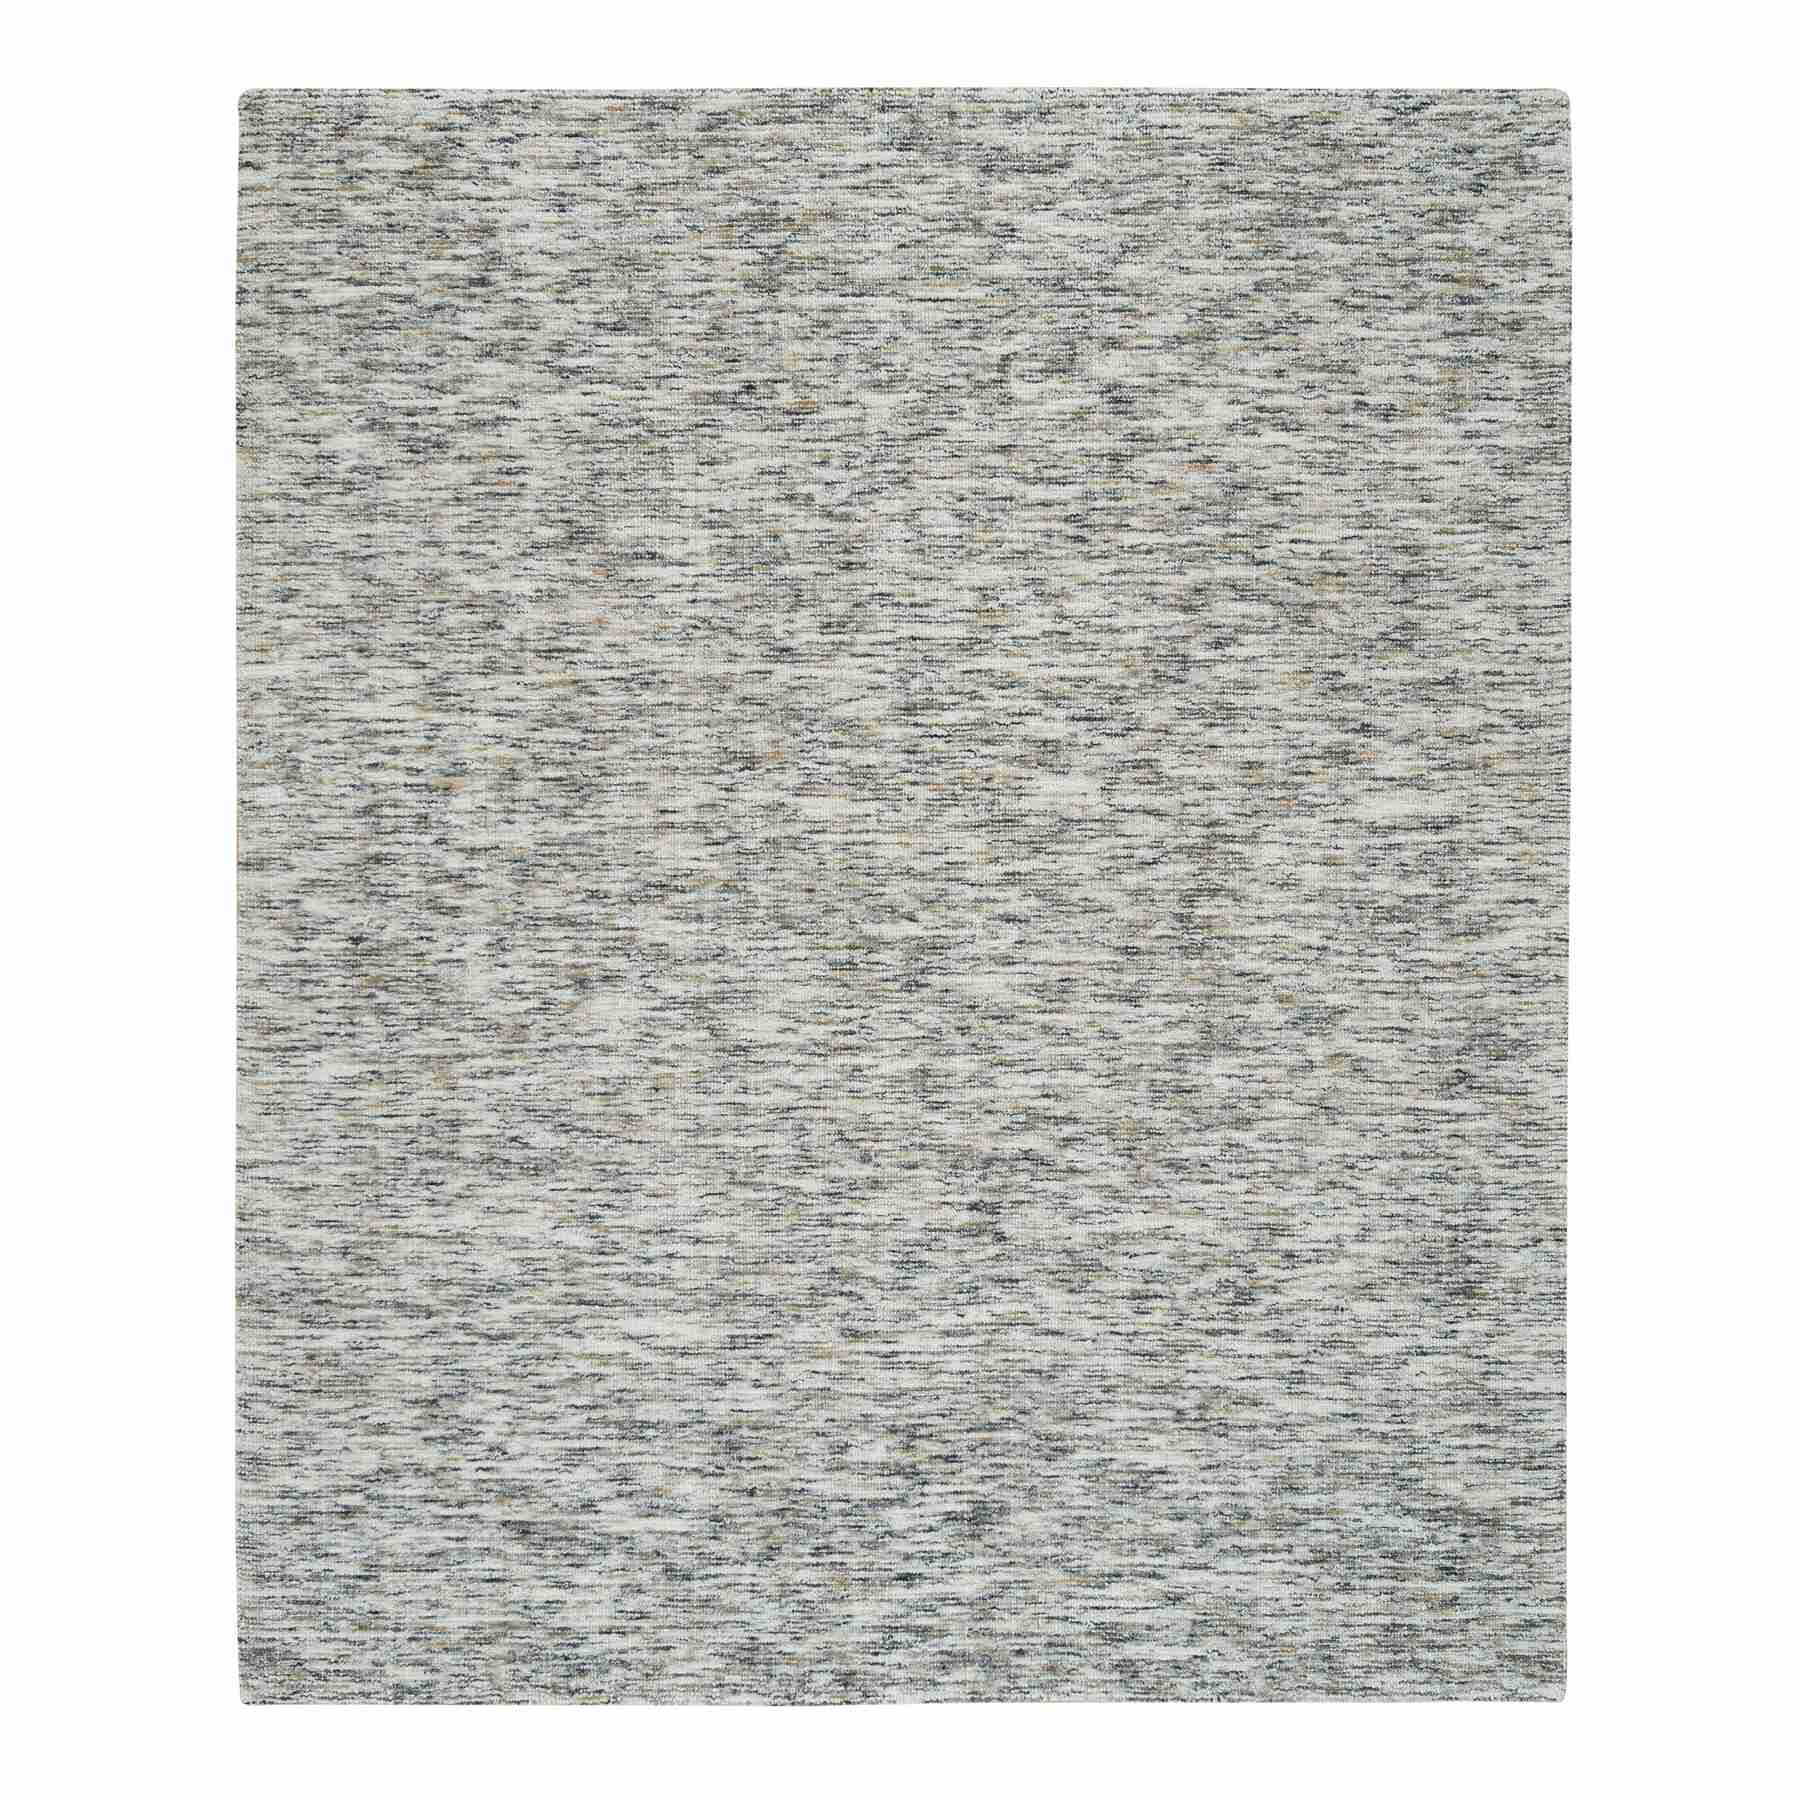 Earth Tone Colors, Pure Wool, Hand Loomed, Modern Striae Design, Soft to the Touch Oriental 